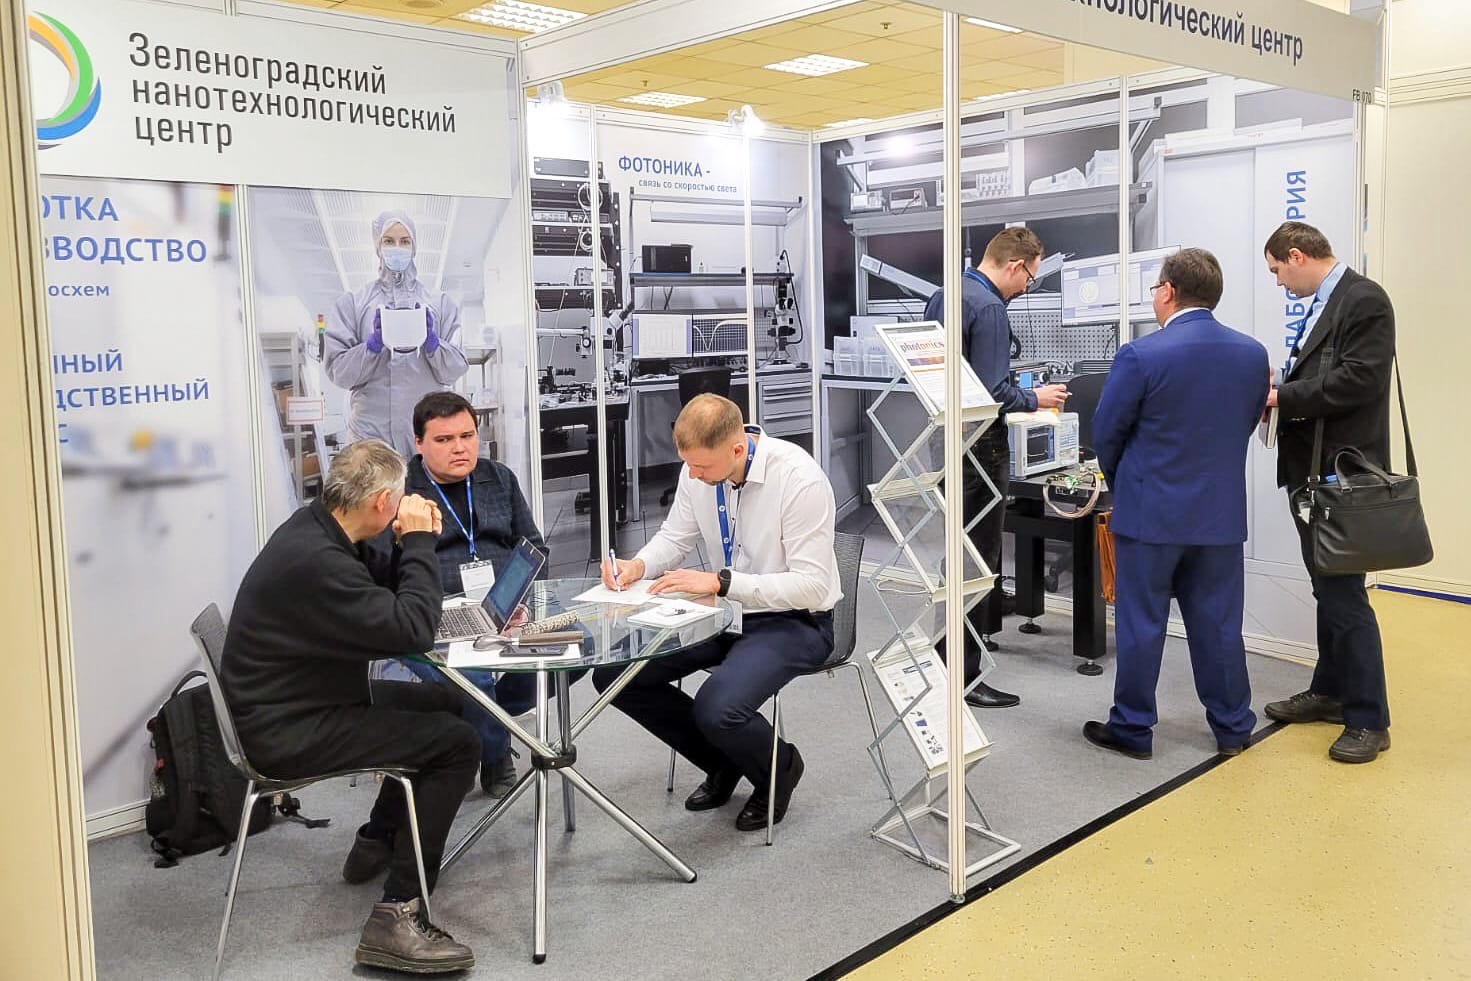 ZNTC participated in the “Photonics” exhibition 